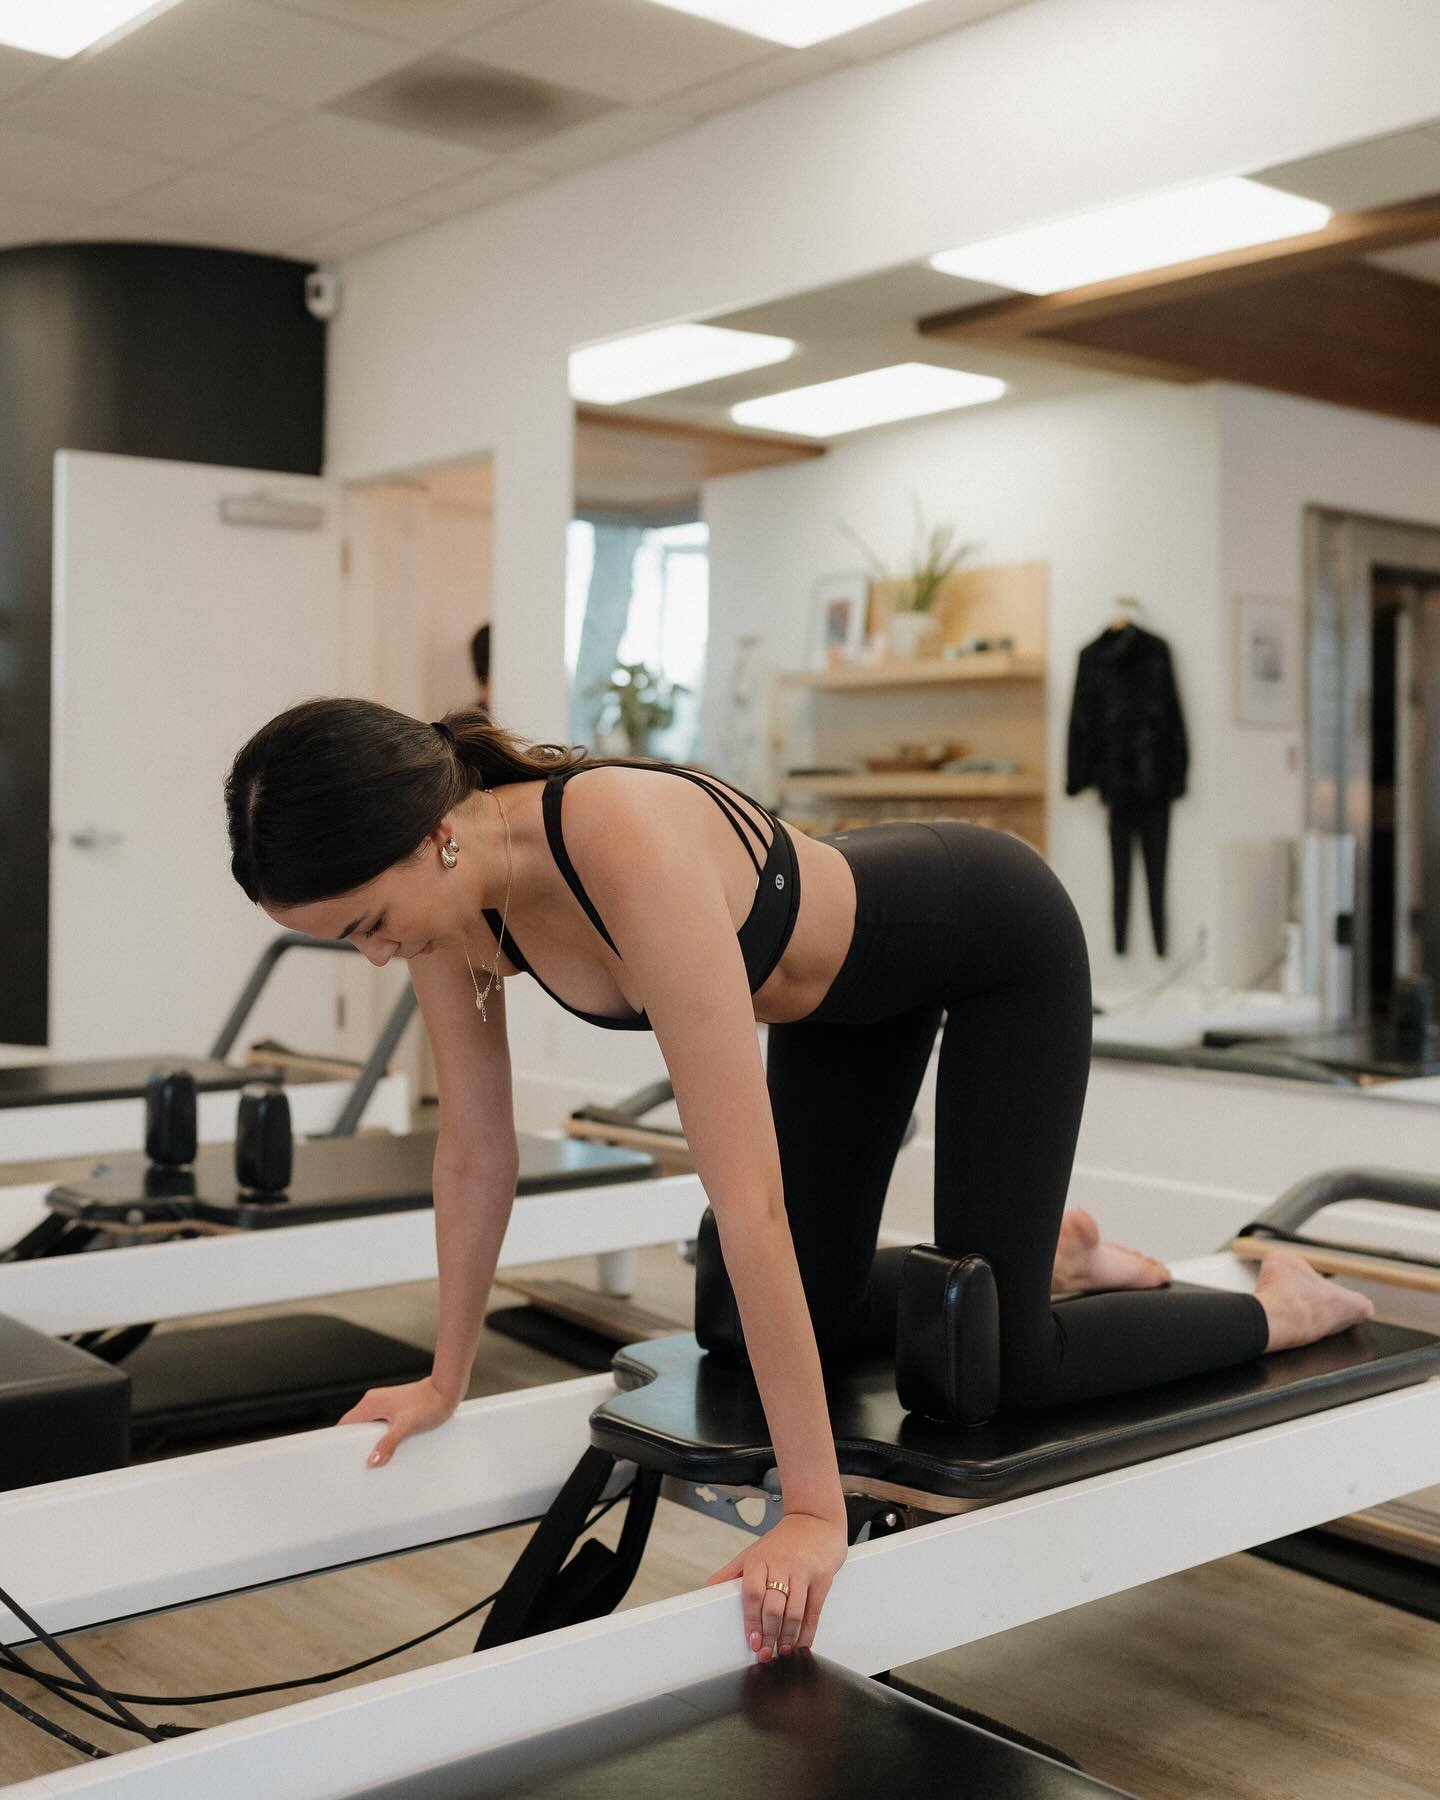 we hear you, classes have been packed!!
but we got you.. new class times + styles are here🔥 

SUNDAY:

8:00am 
Pilates Reformer
&mdash; with @sarabluebell 

12:00pm
Intro to Pilates
&mdash; with @sarabluebell 

TUESDAY:

8:00pm
Level 1 Pilates Refor